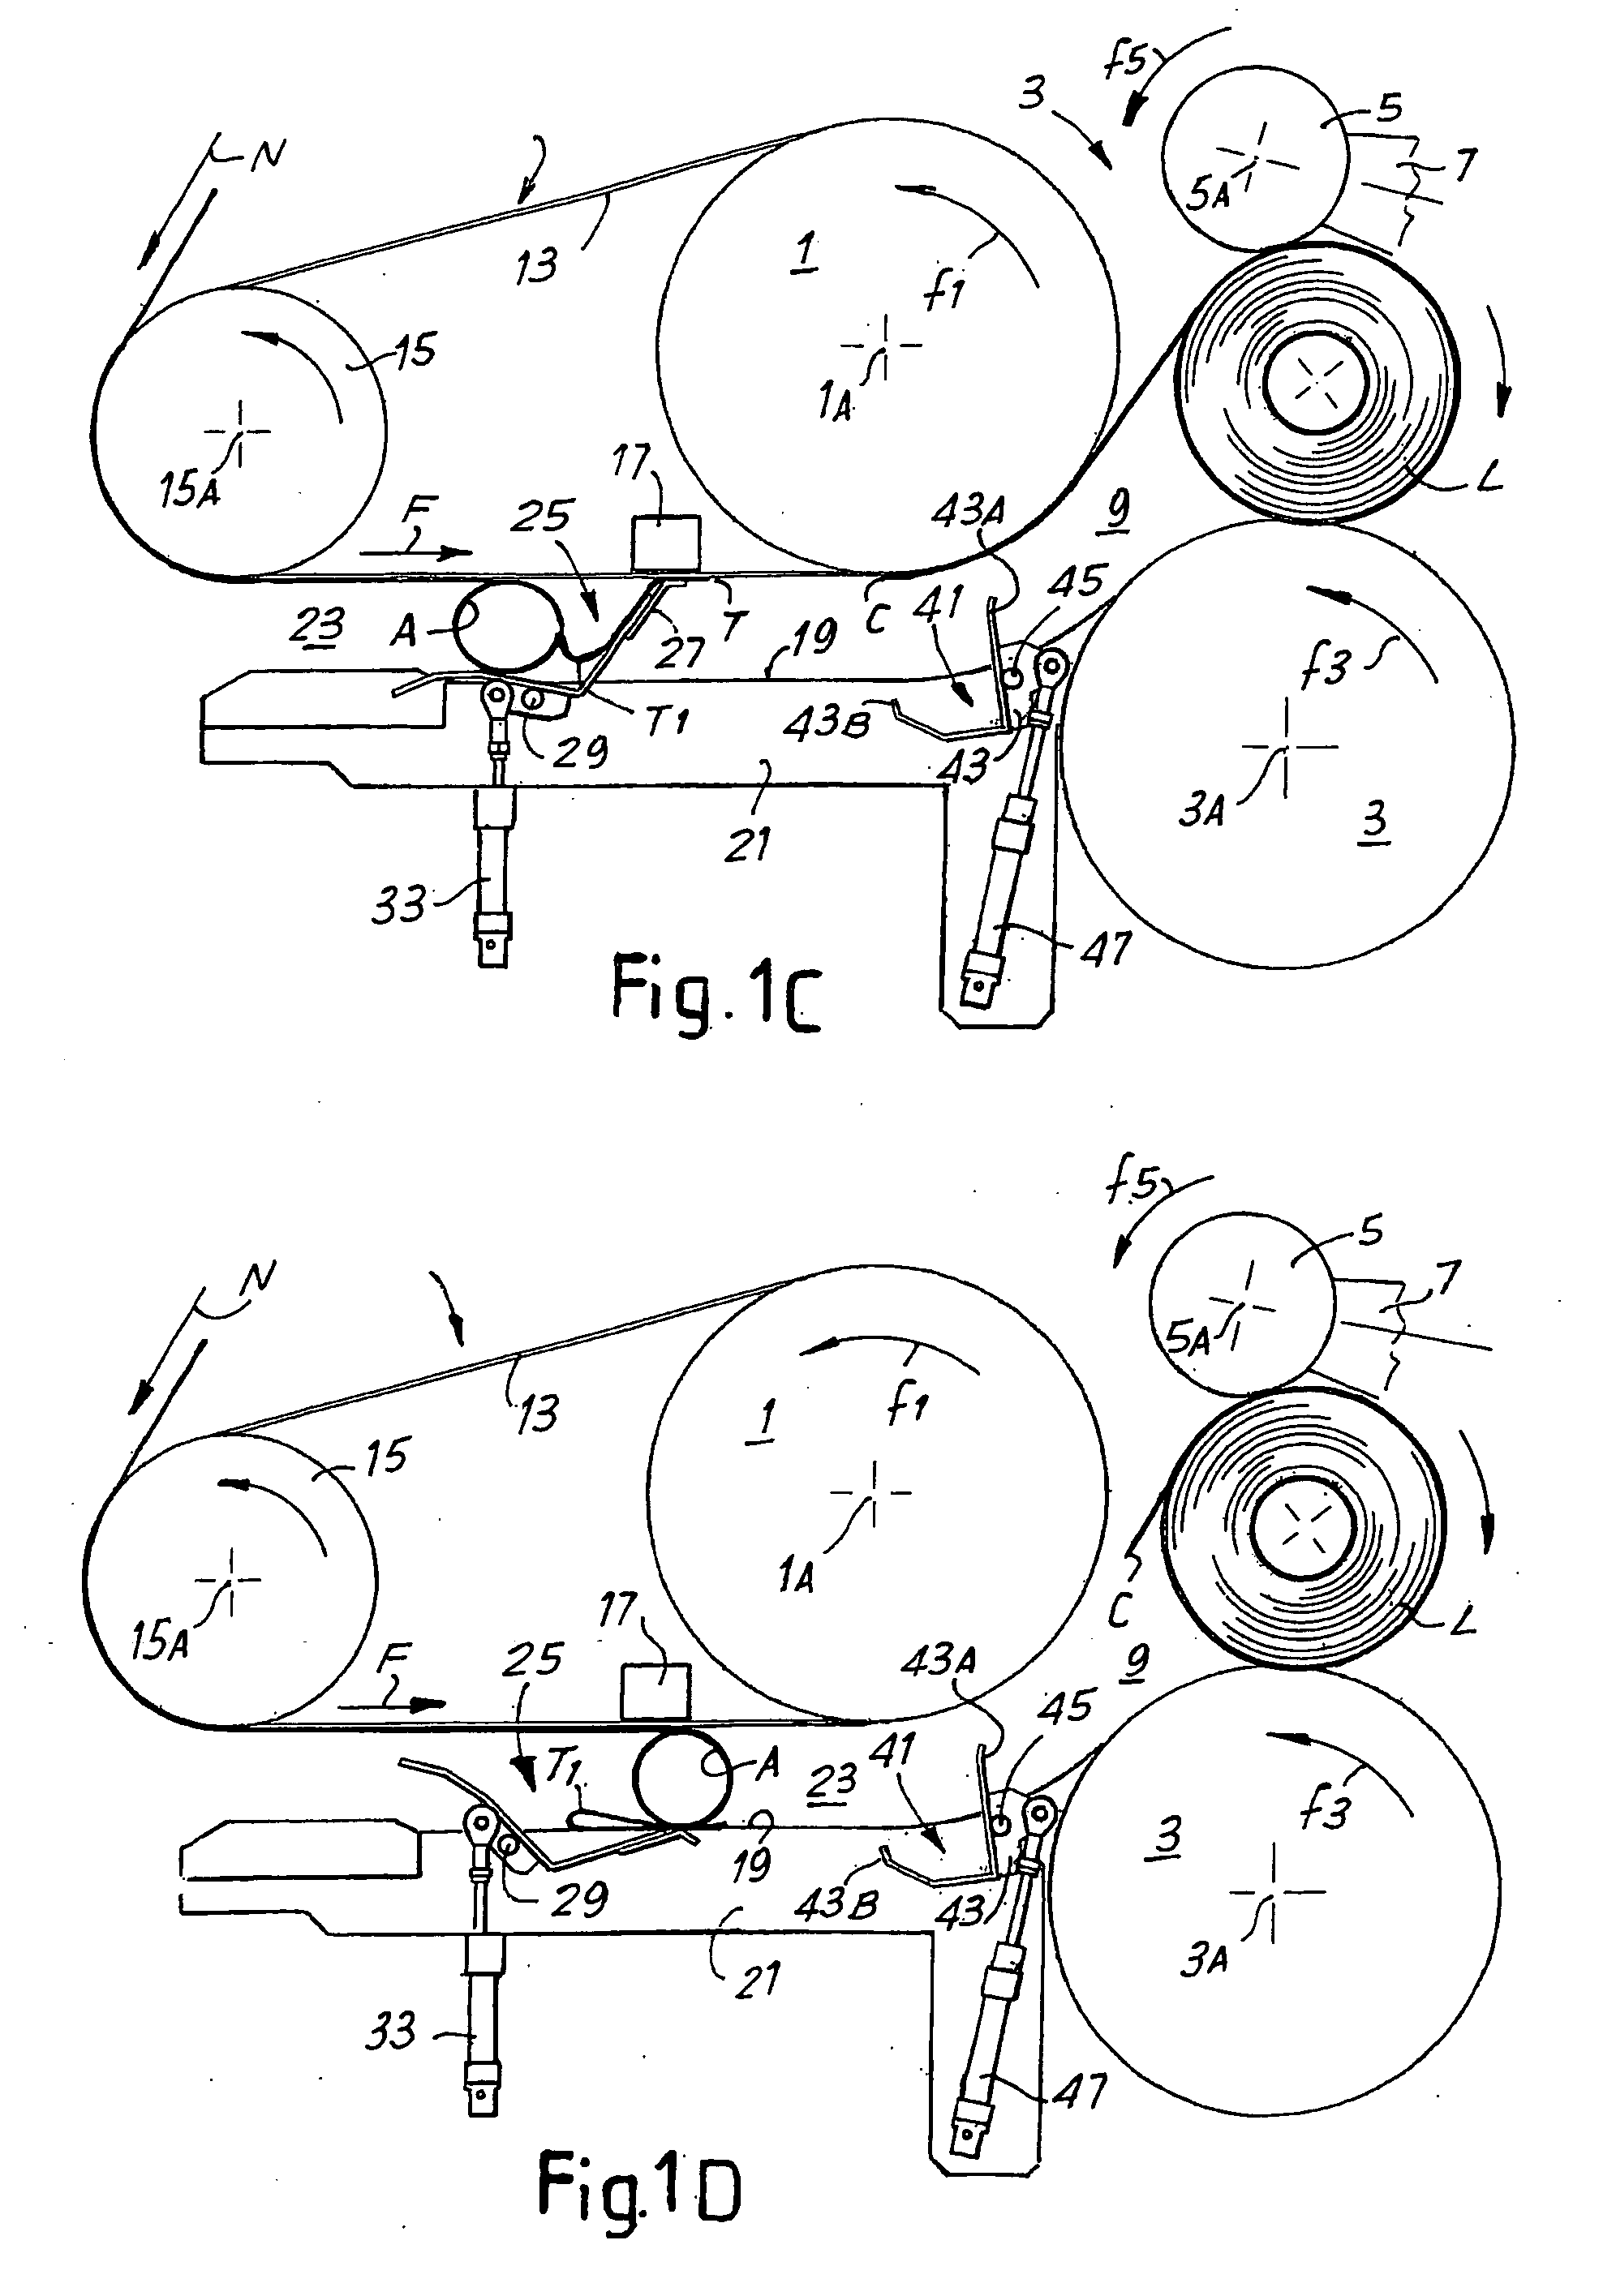 Method and Machine for Forming Logs of Web Material, with a Mechanical Device for Forming the Initial Turn of the Logs